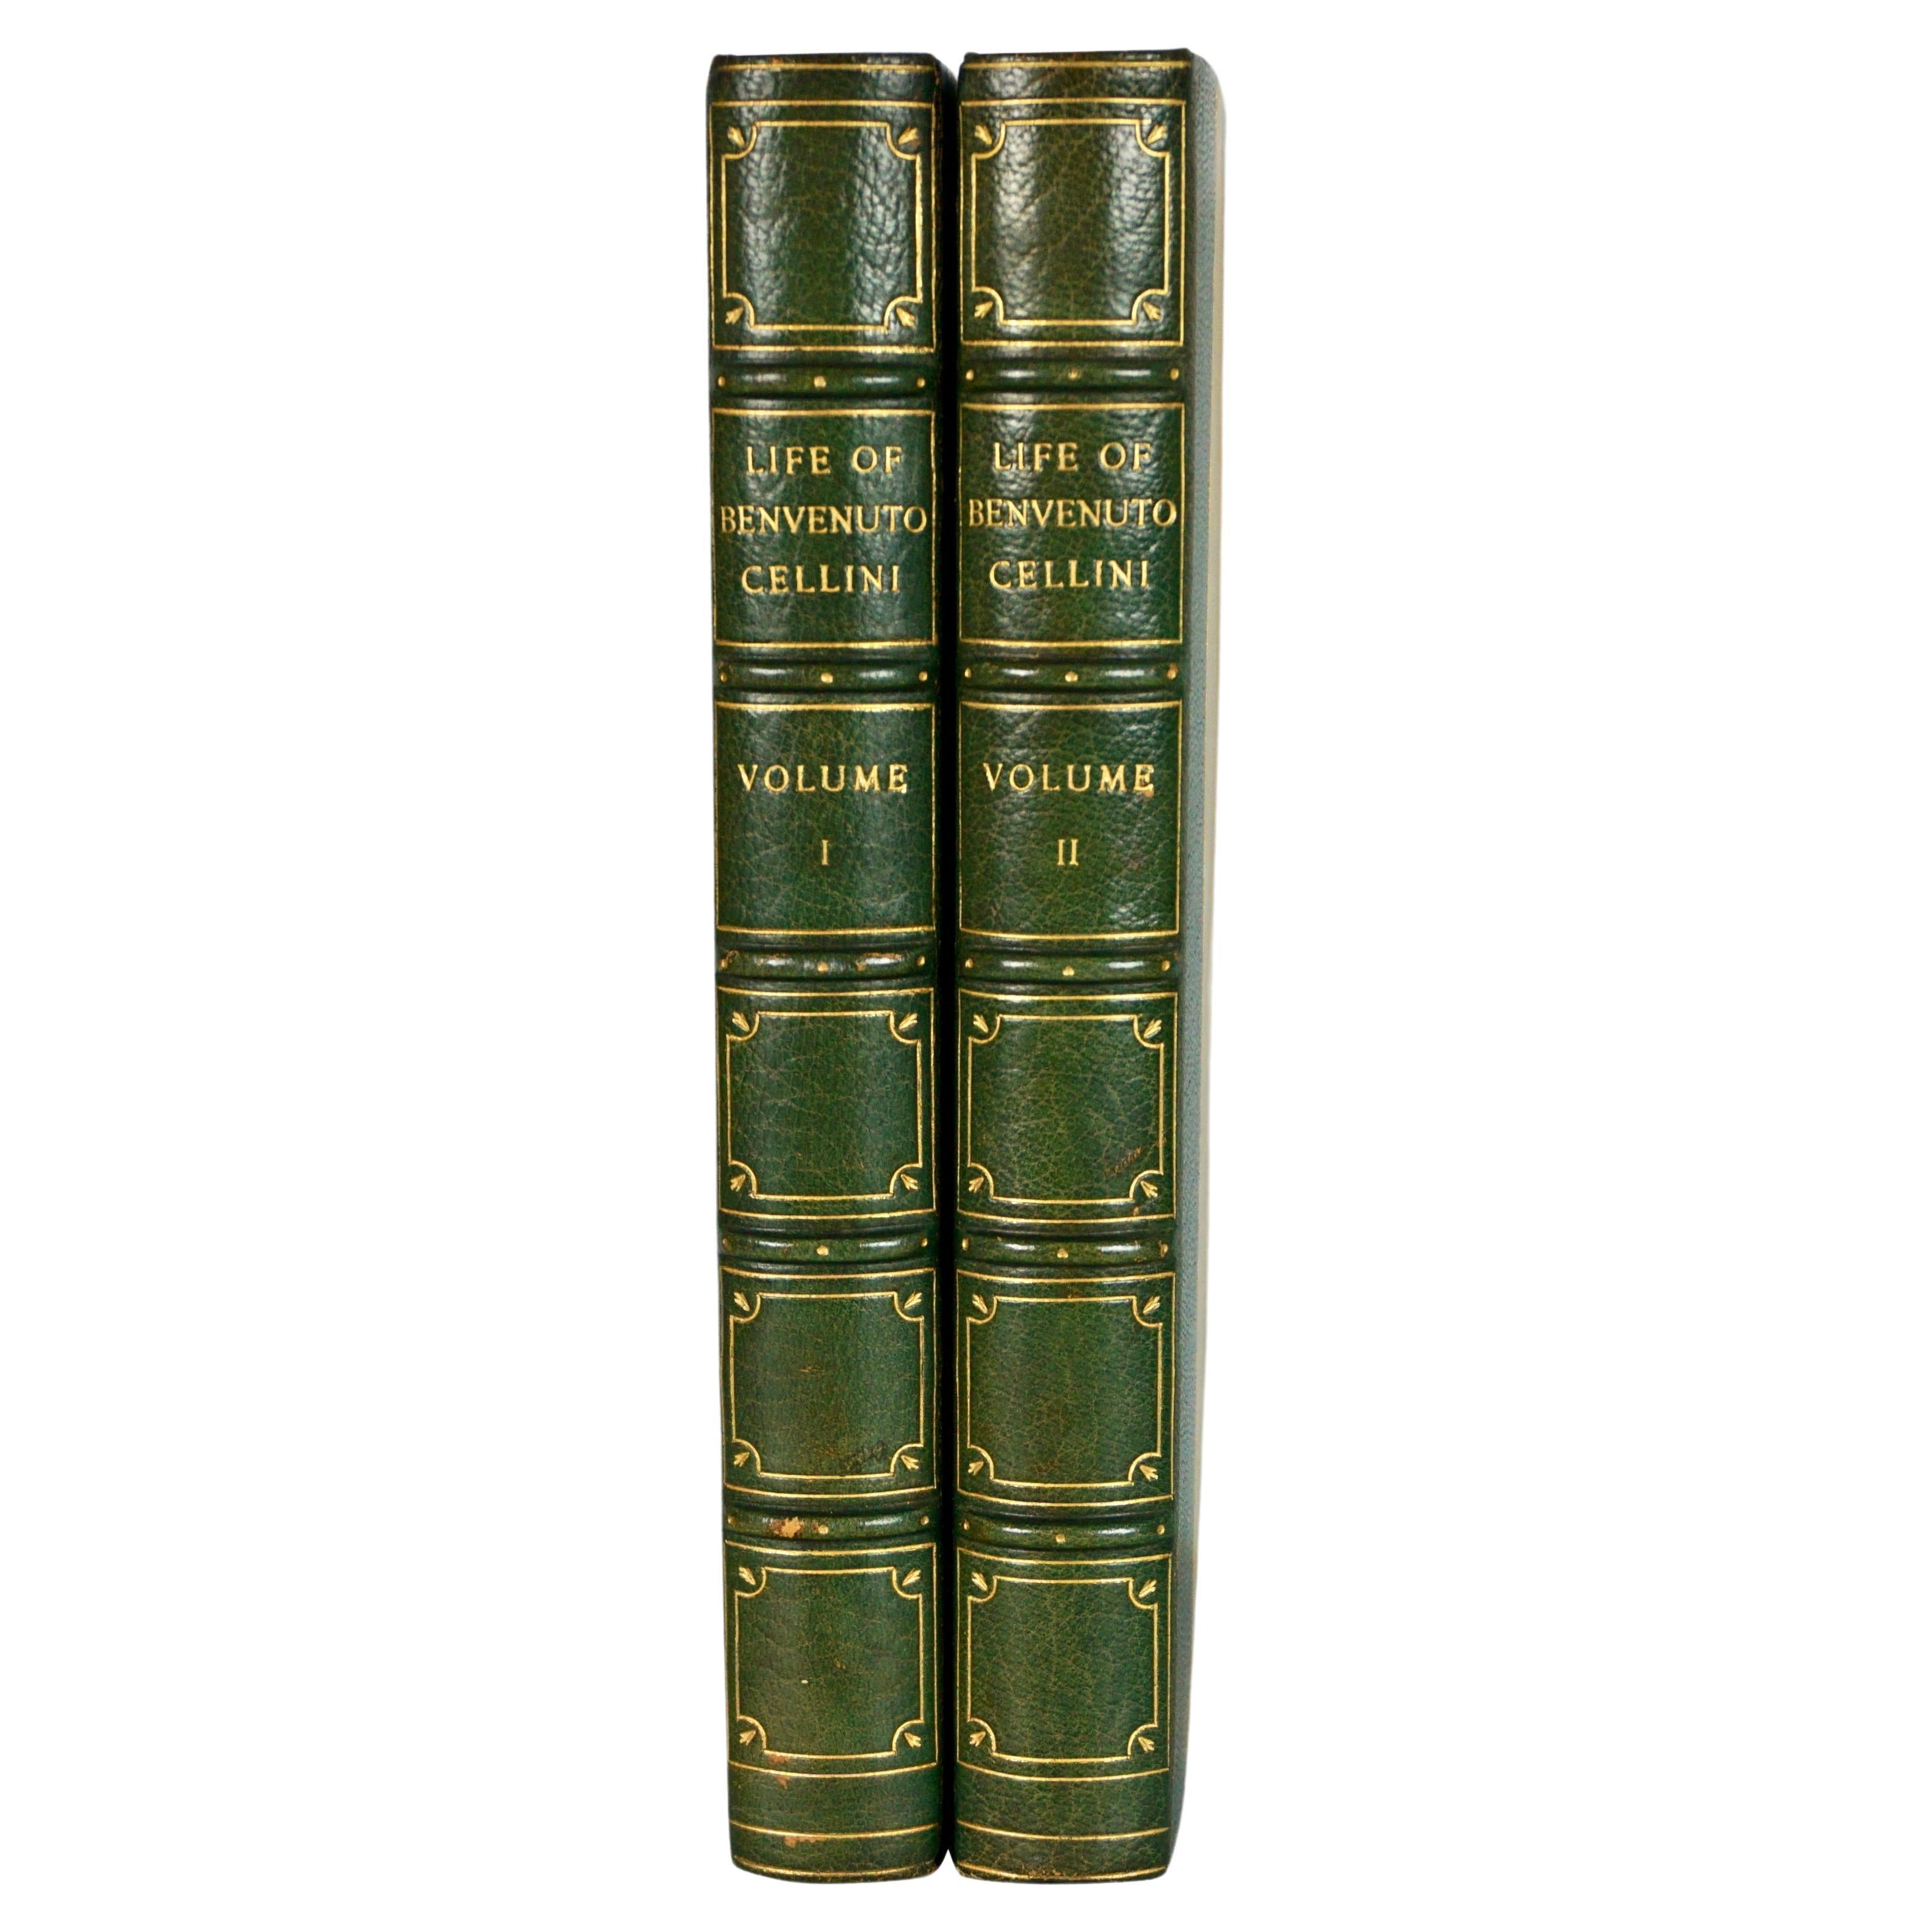 The Life of Benvenuto Cellini in 2 volumes. Published: 1906 by Brentanos.